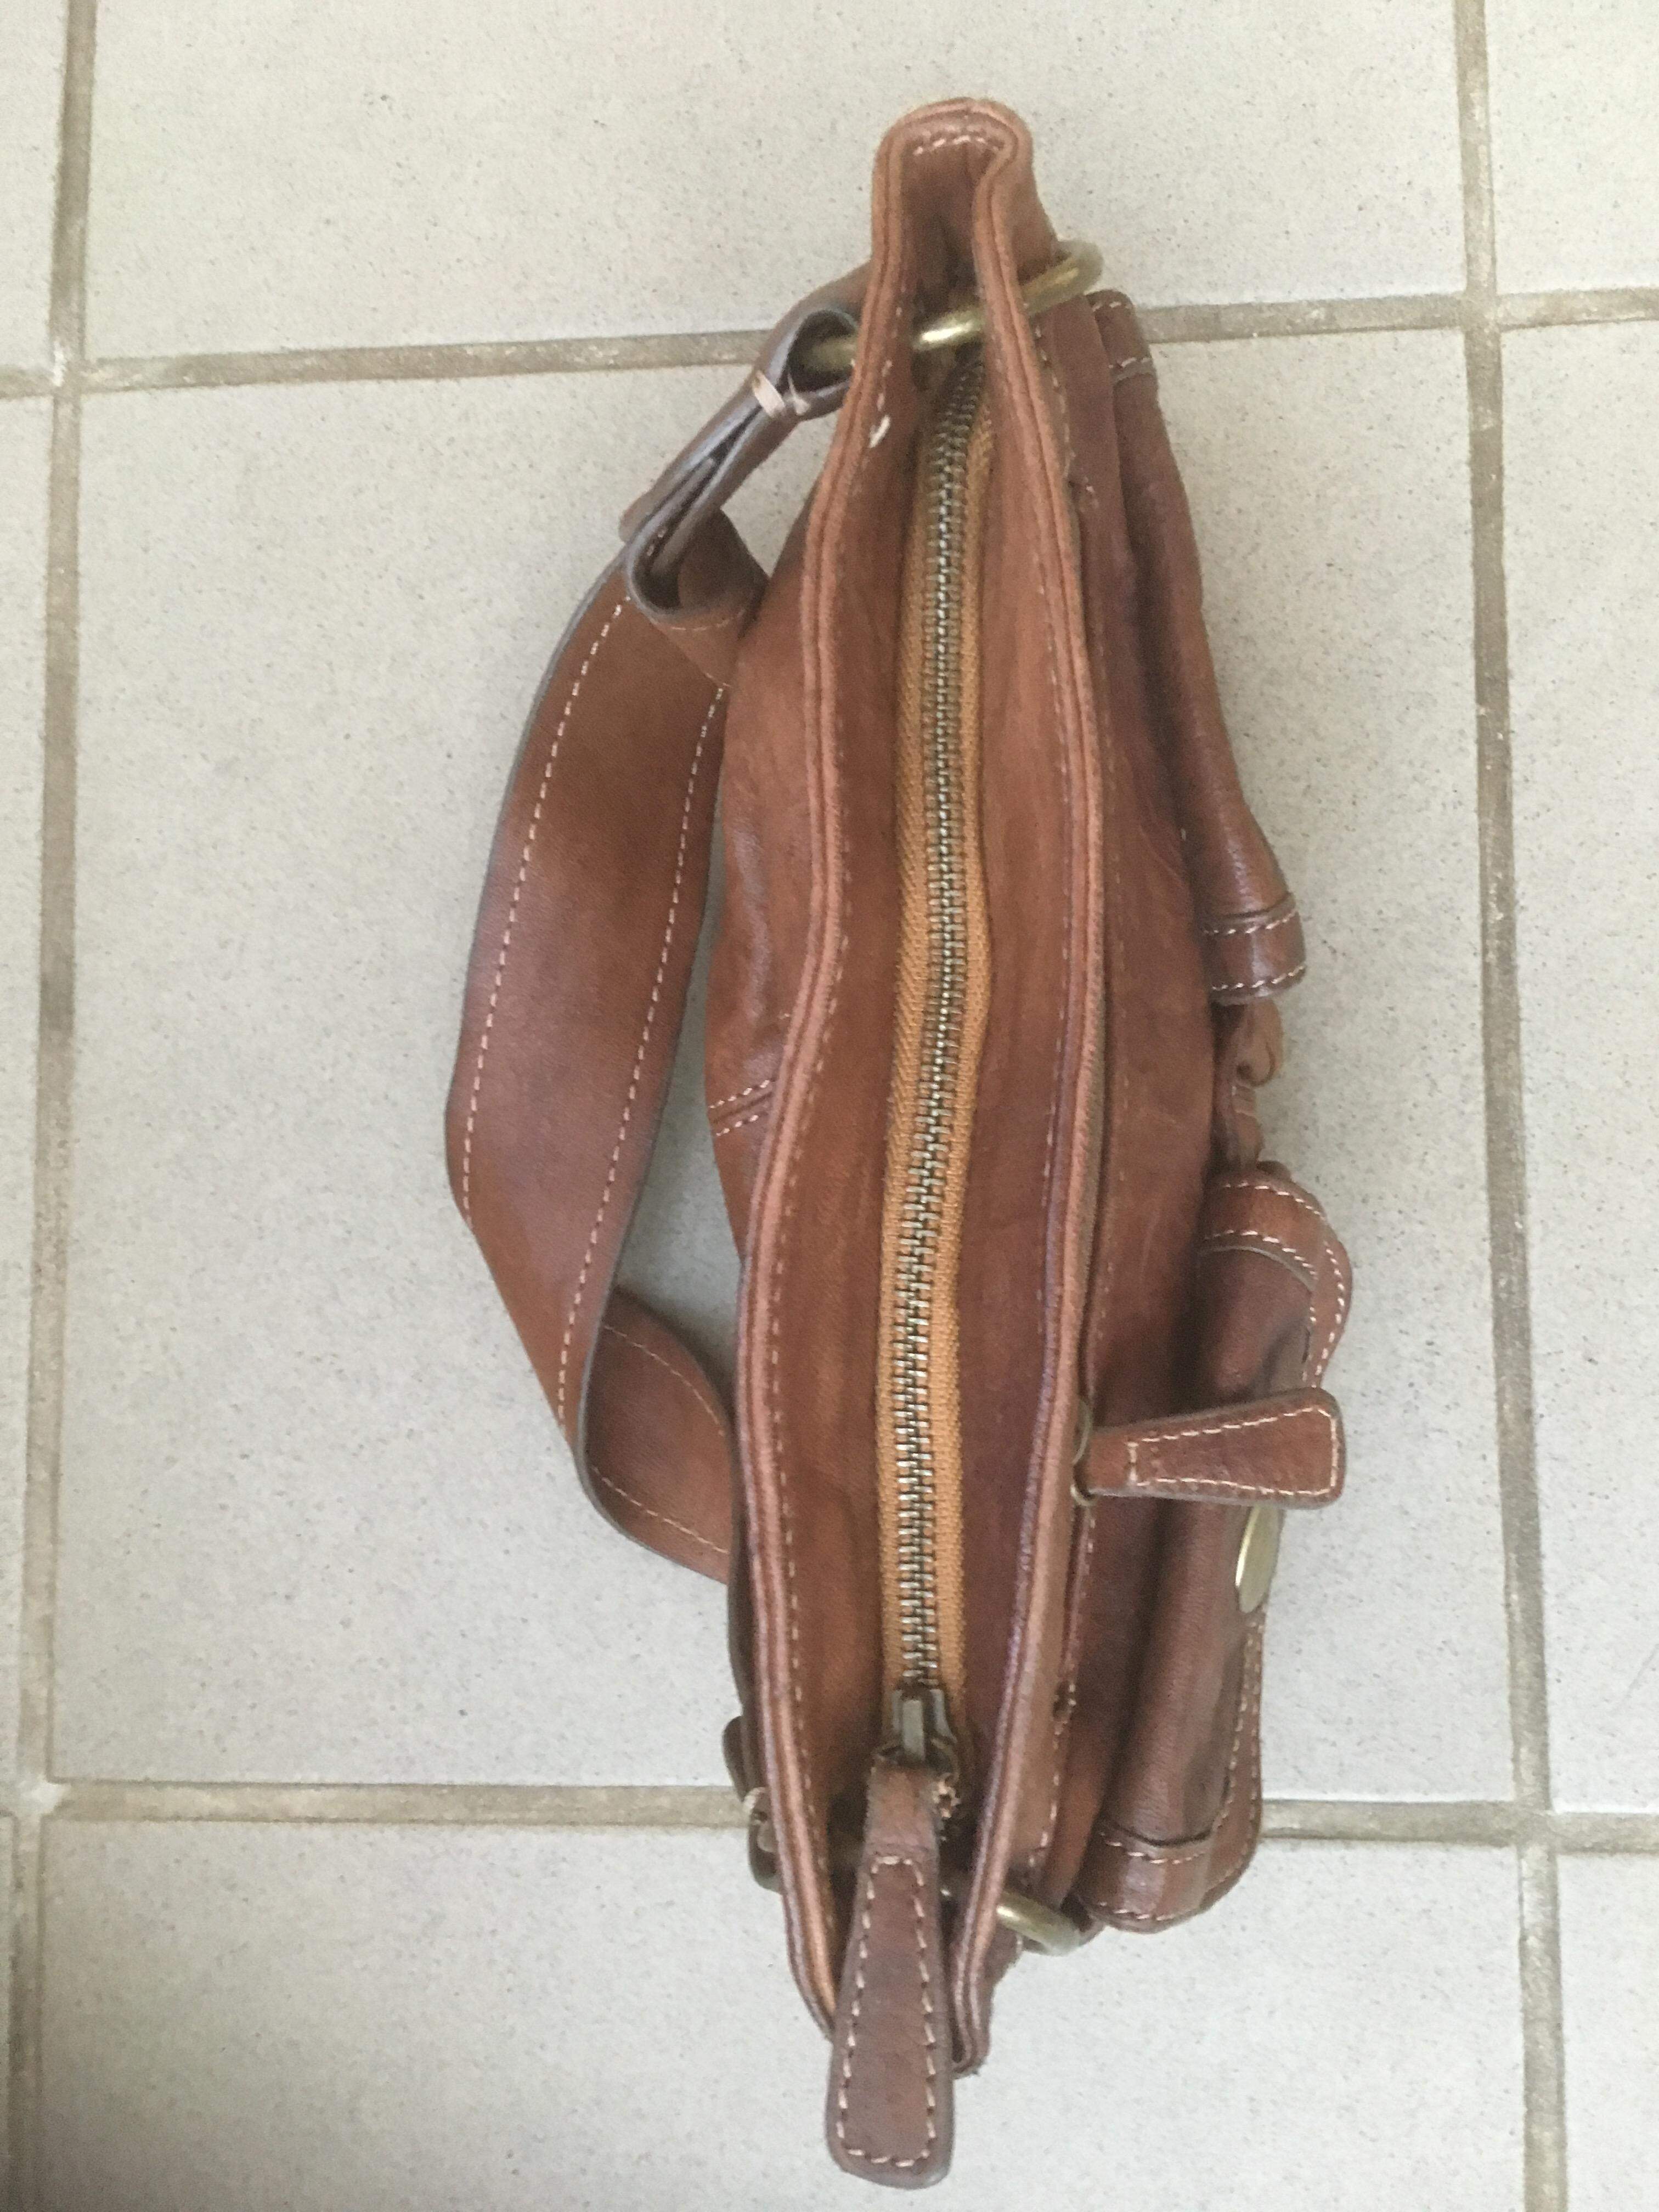 A replacement zip for this well-loved bag